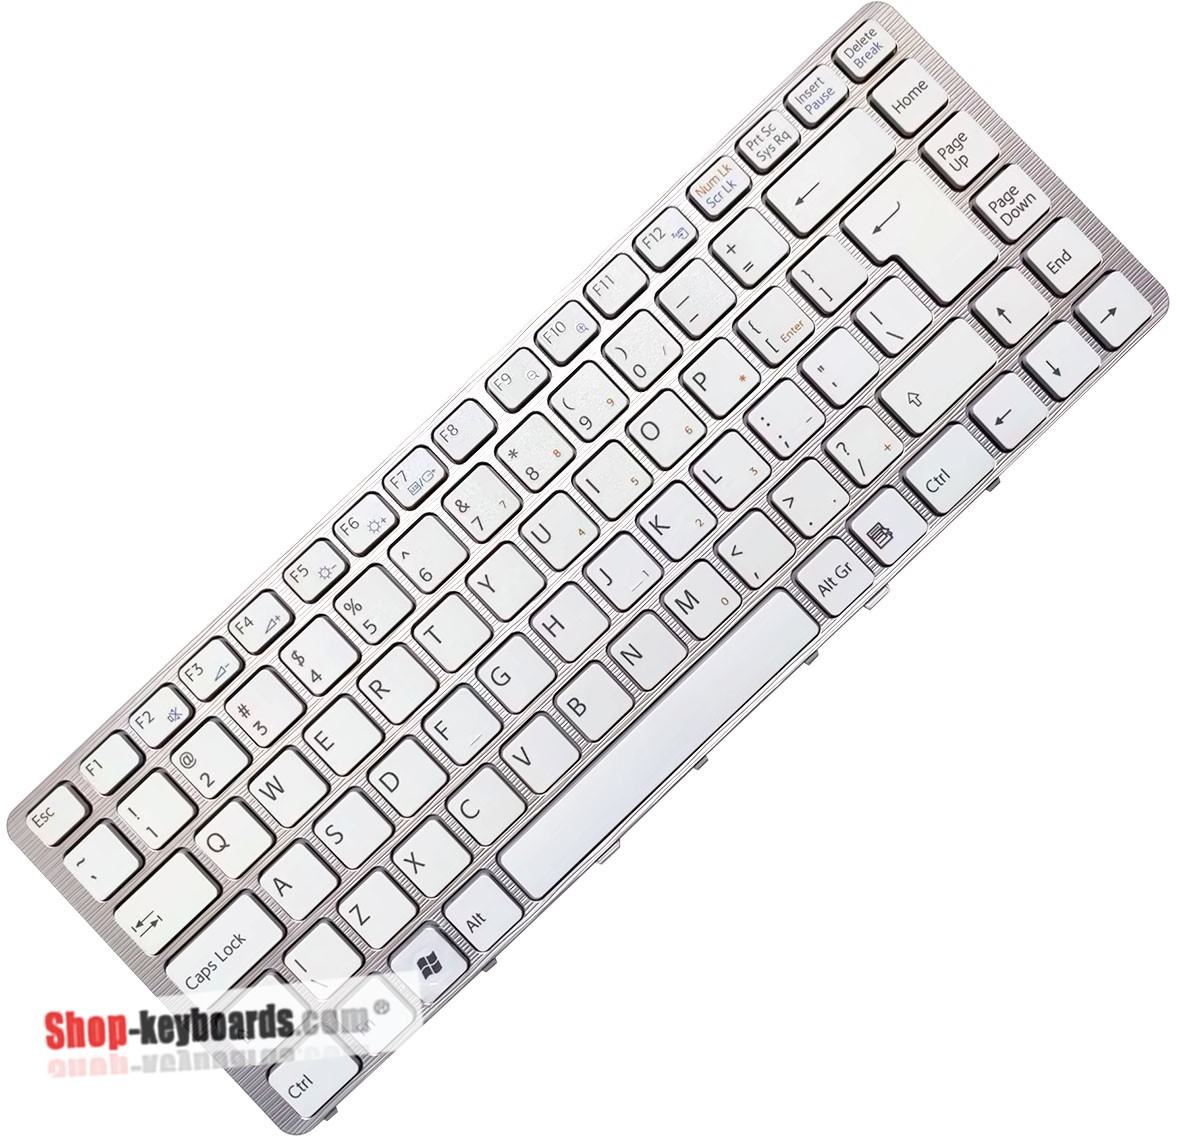 Sony 148737981 Keyboard replacement